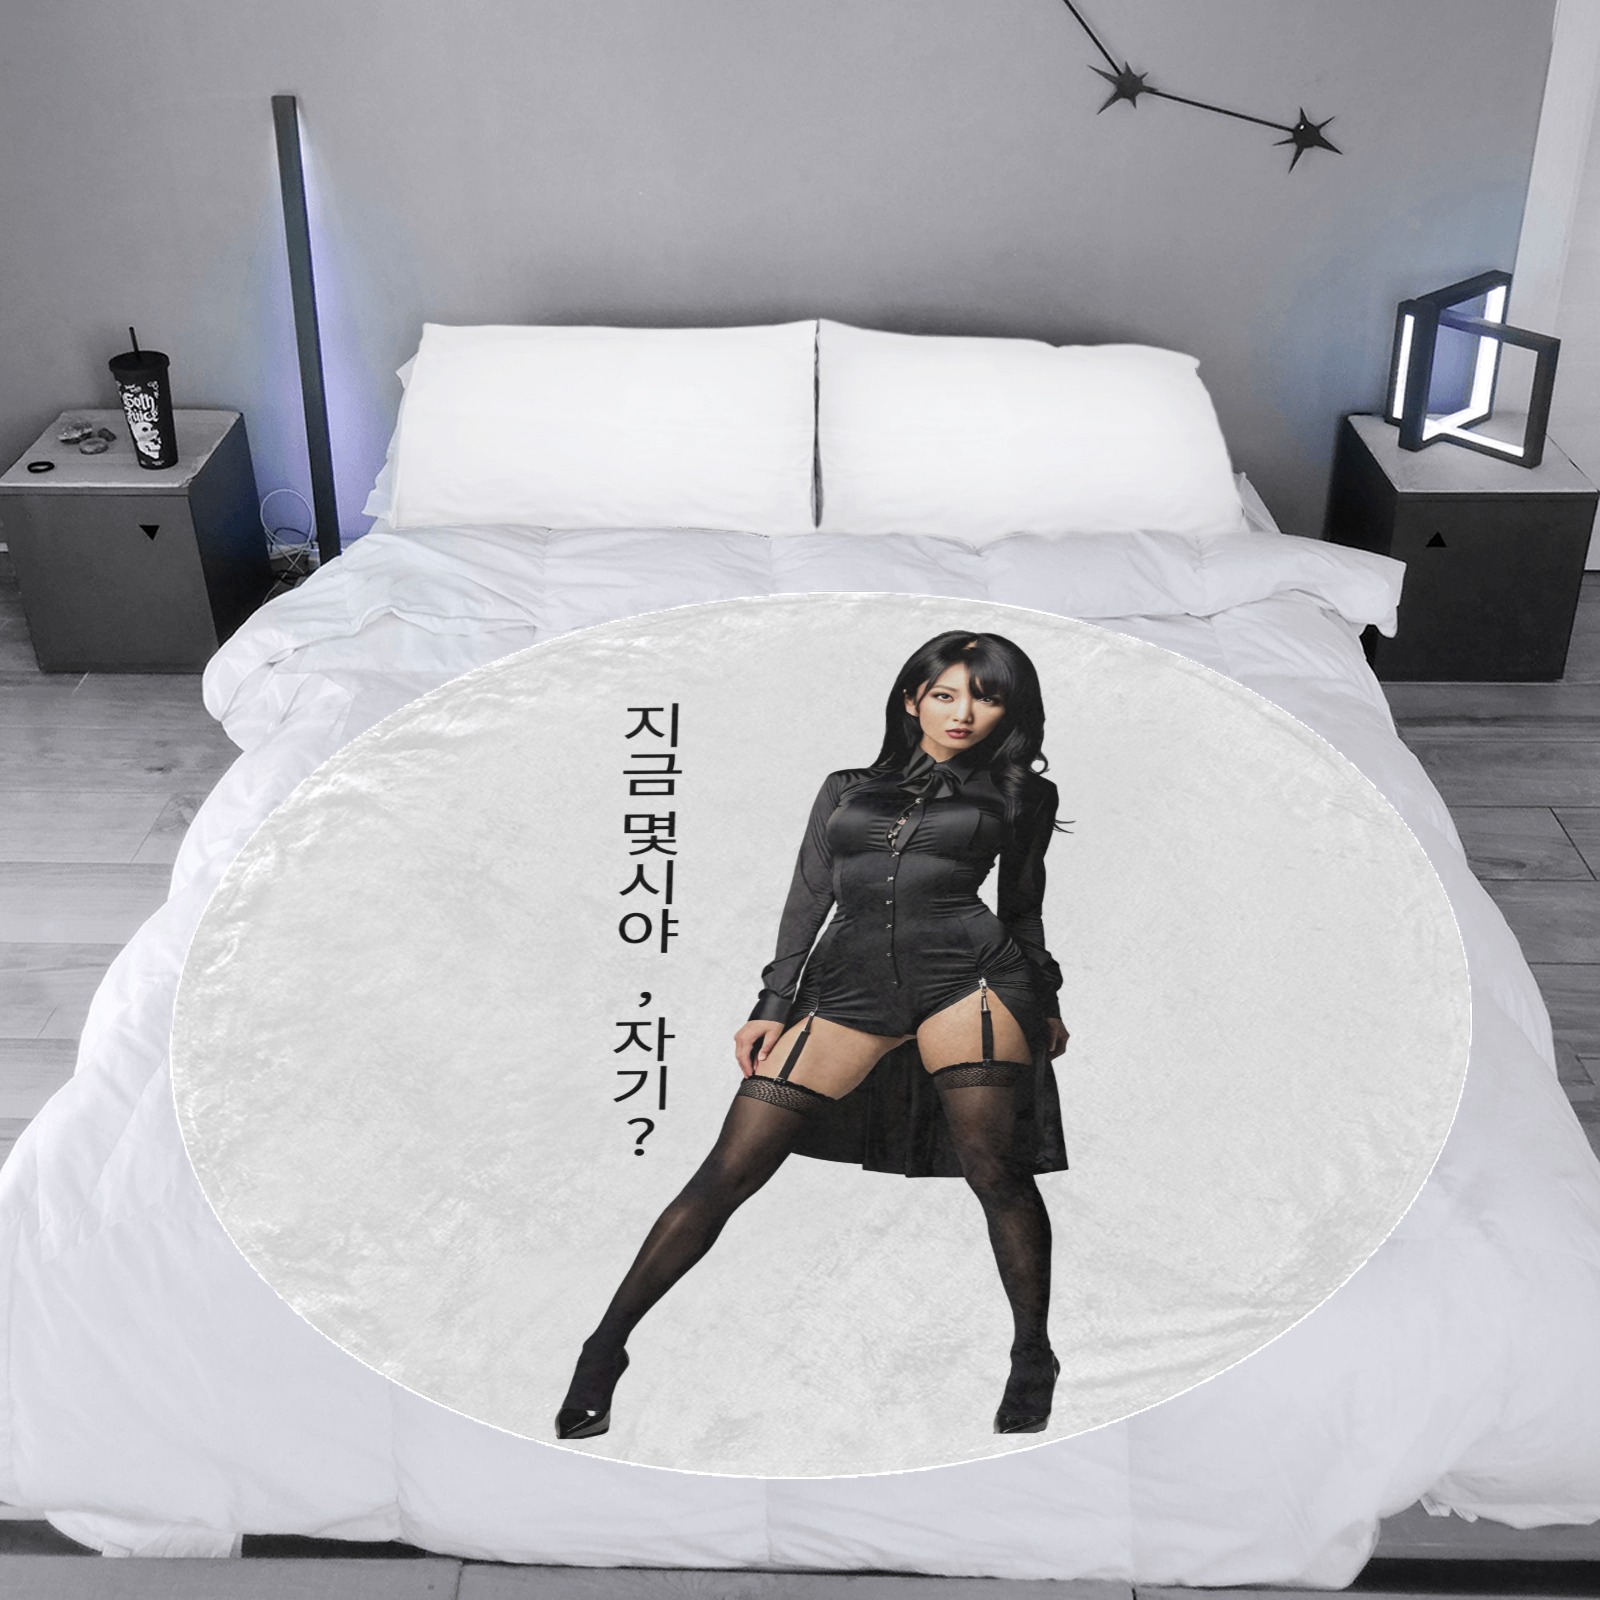 What time is it, honey? Circular Ultra-Soft Micro Fleece Blanket 60"